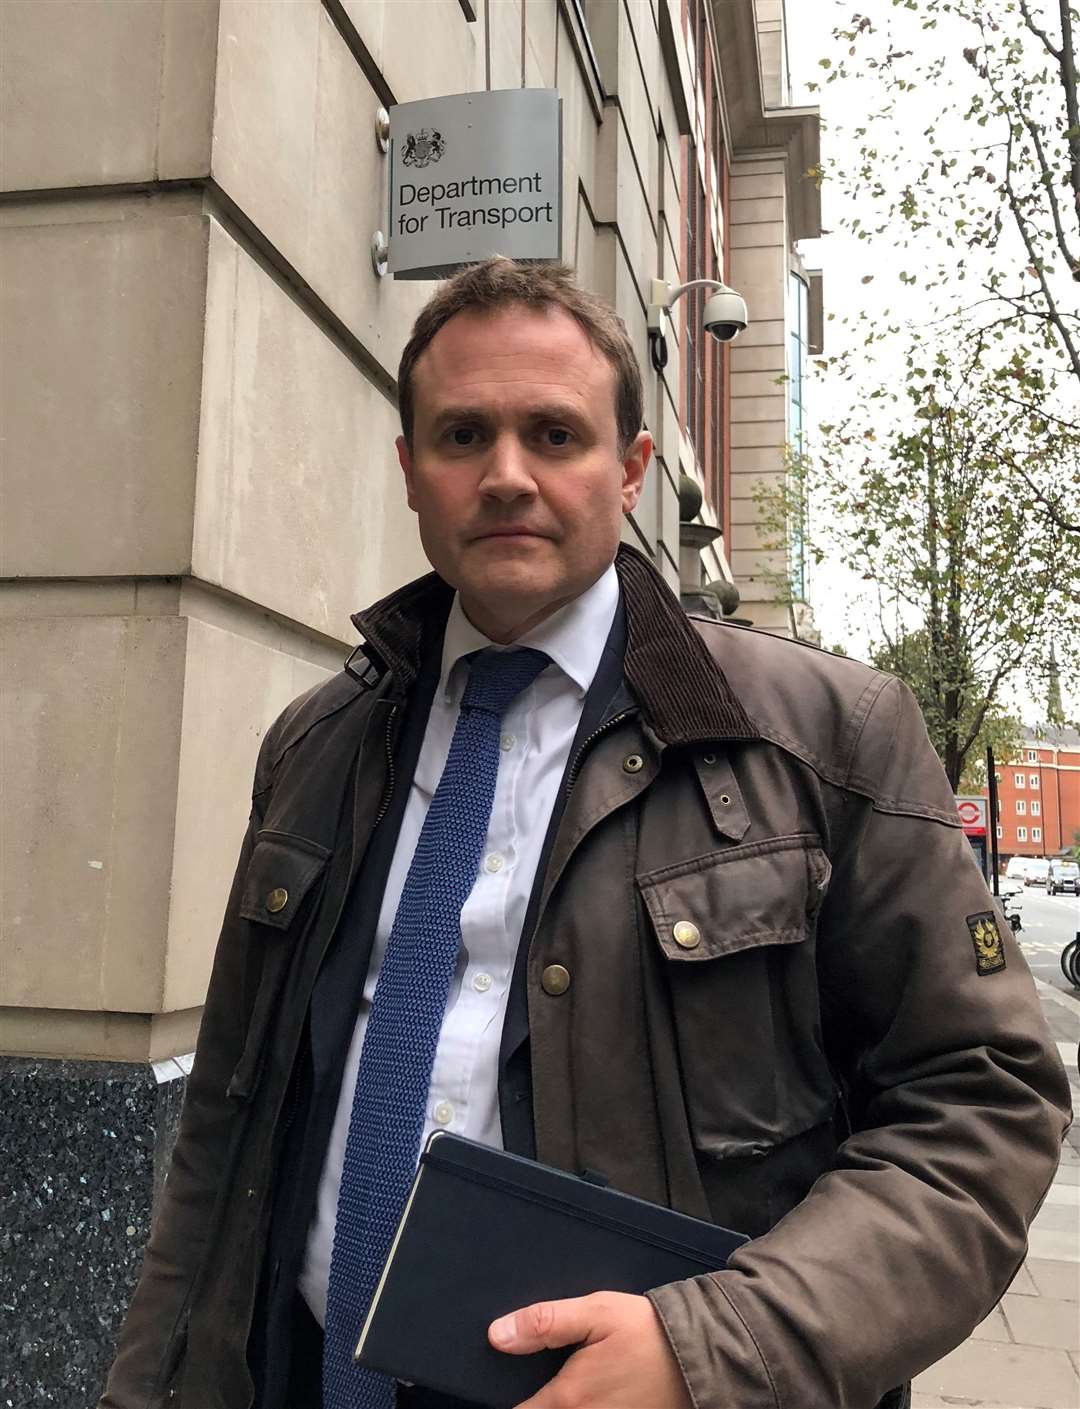 Tom Tugendhat is the sitting MP